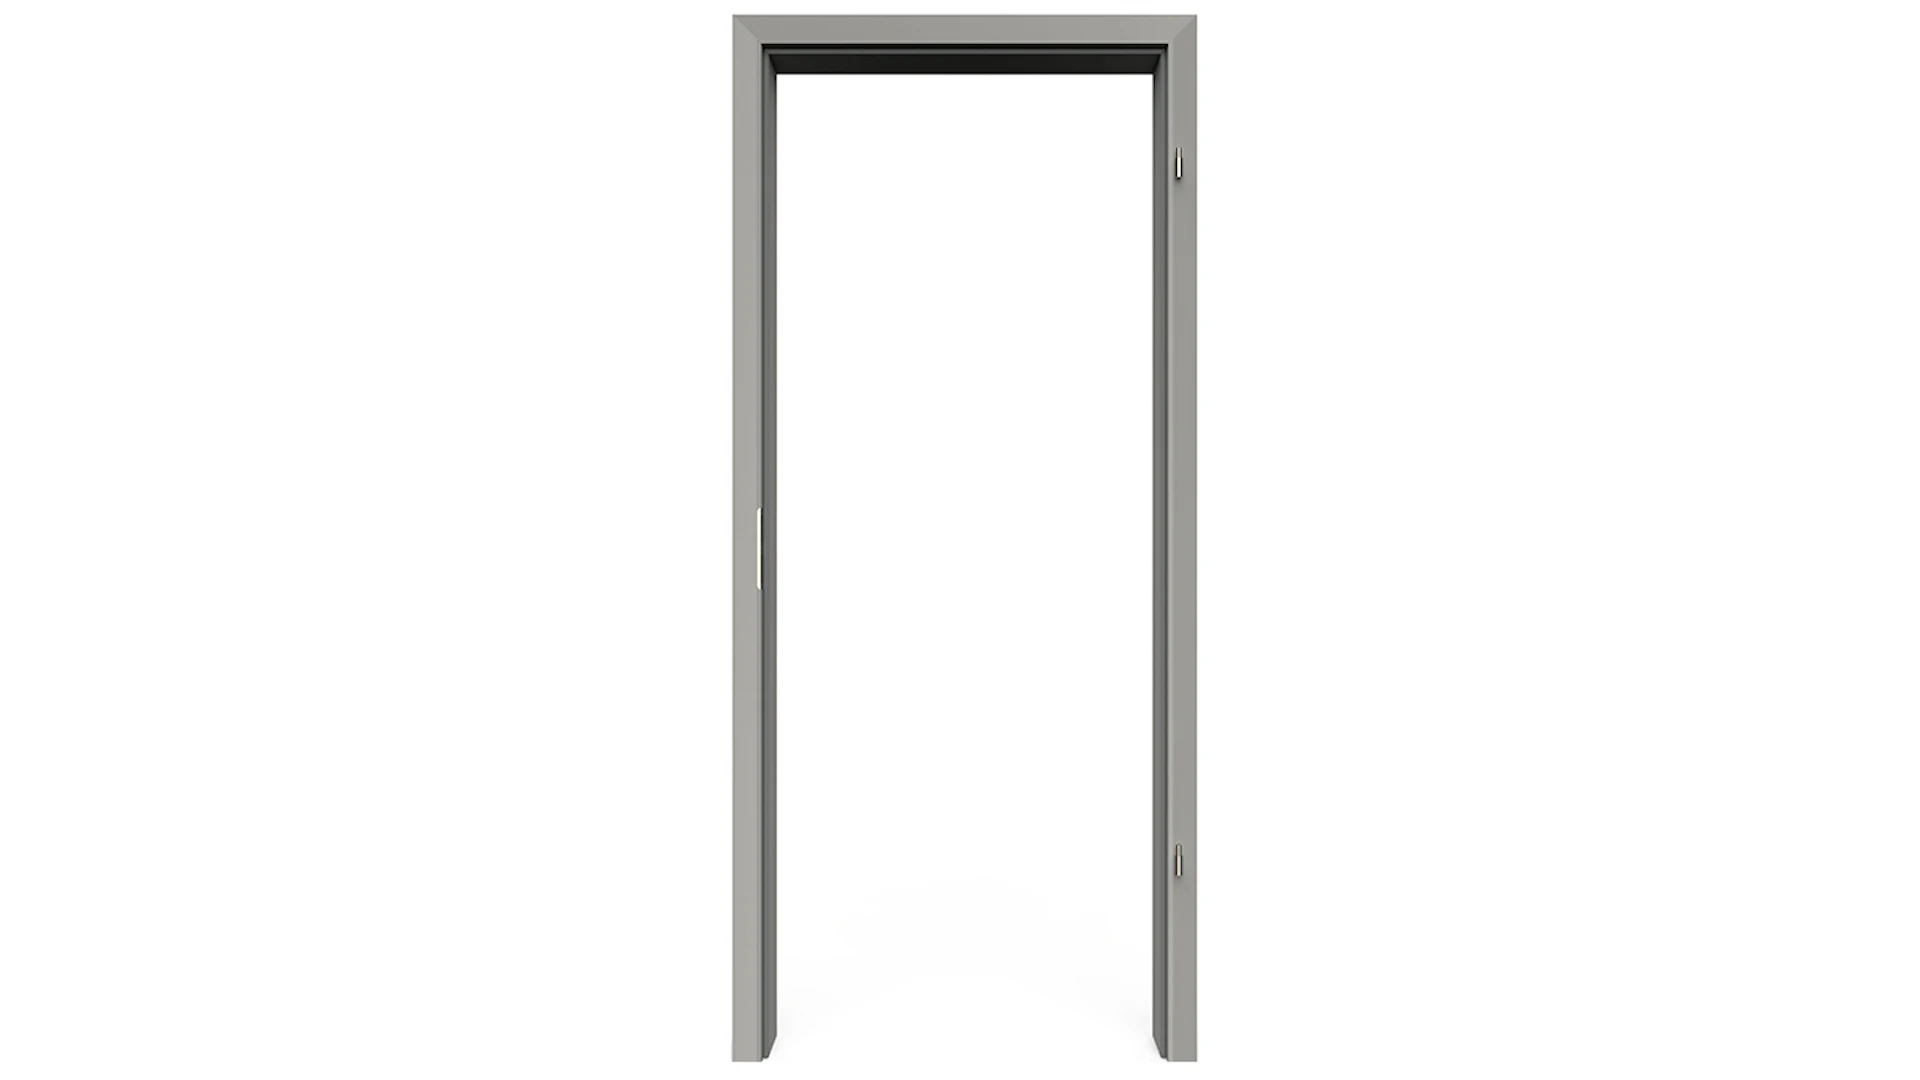 planeo Standard Door frame, rounded edge - CPL Silver grey - 2110 x 735 x 100 mm DIN Right